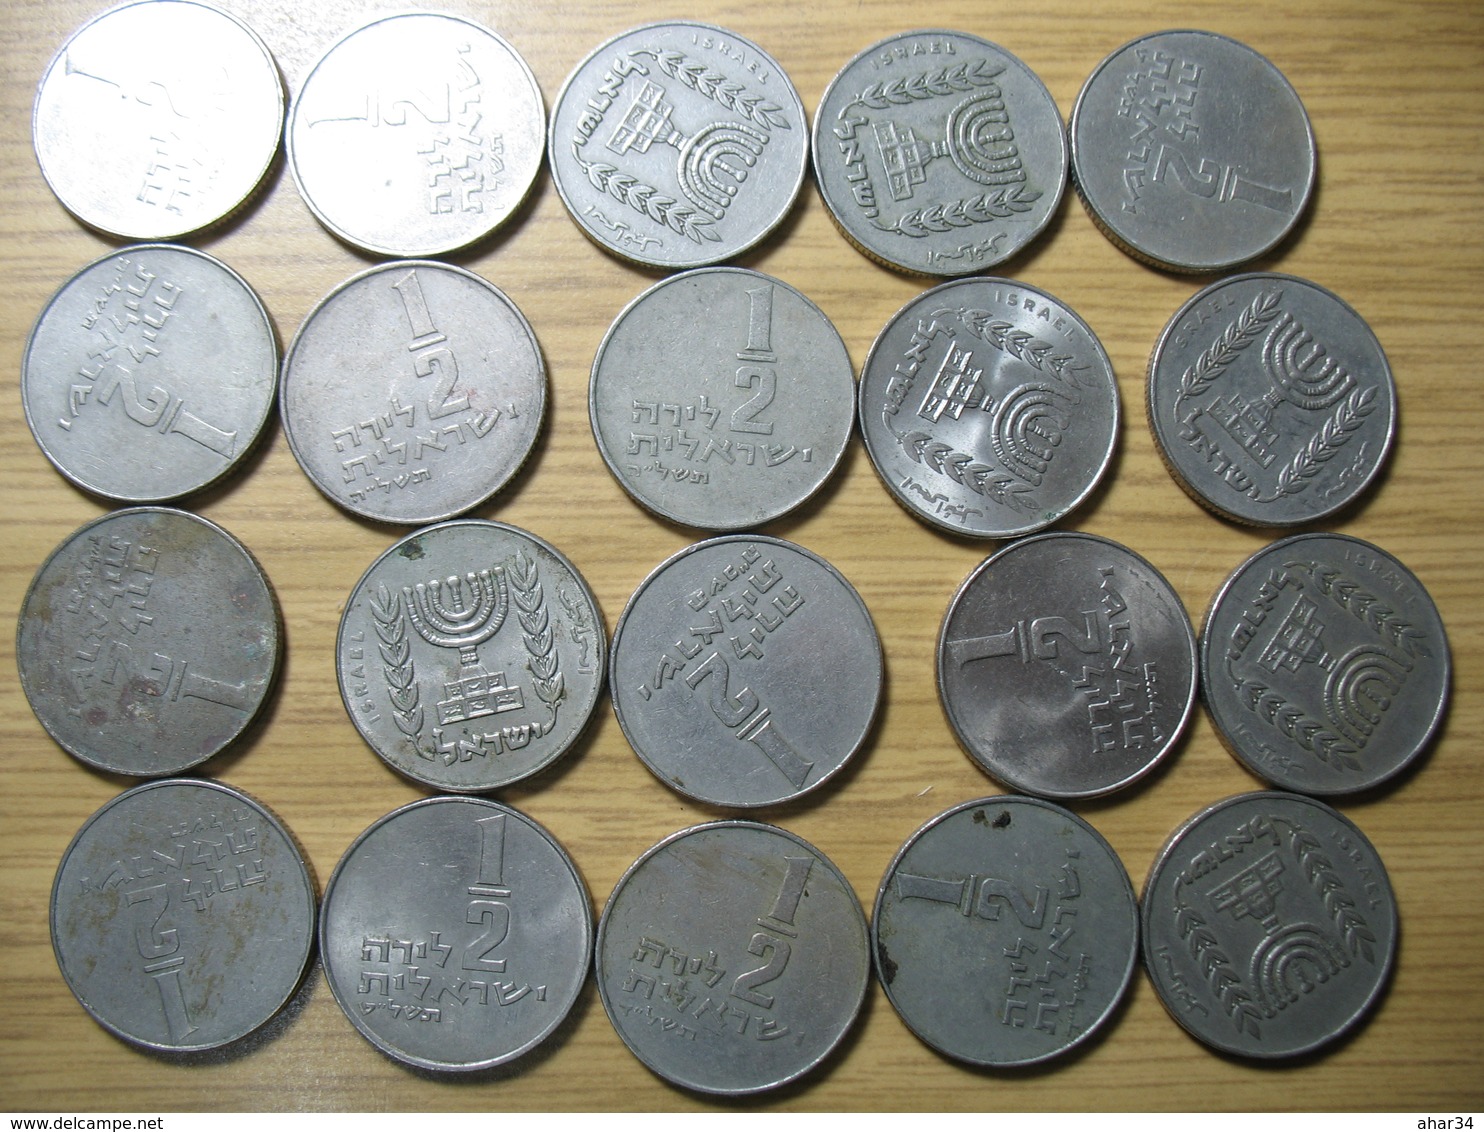 ISRAEL HALF LIRA LOT OF 20 PIECES FROM THE BAG - Israel